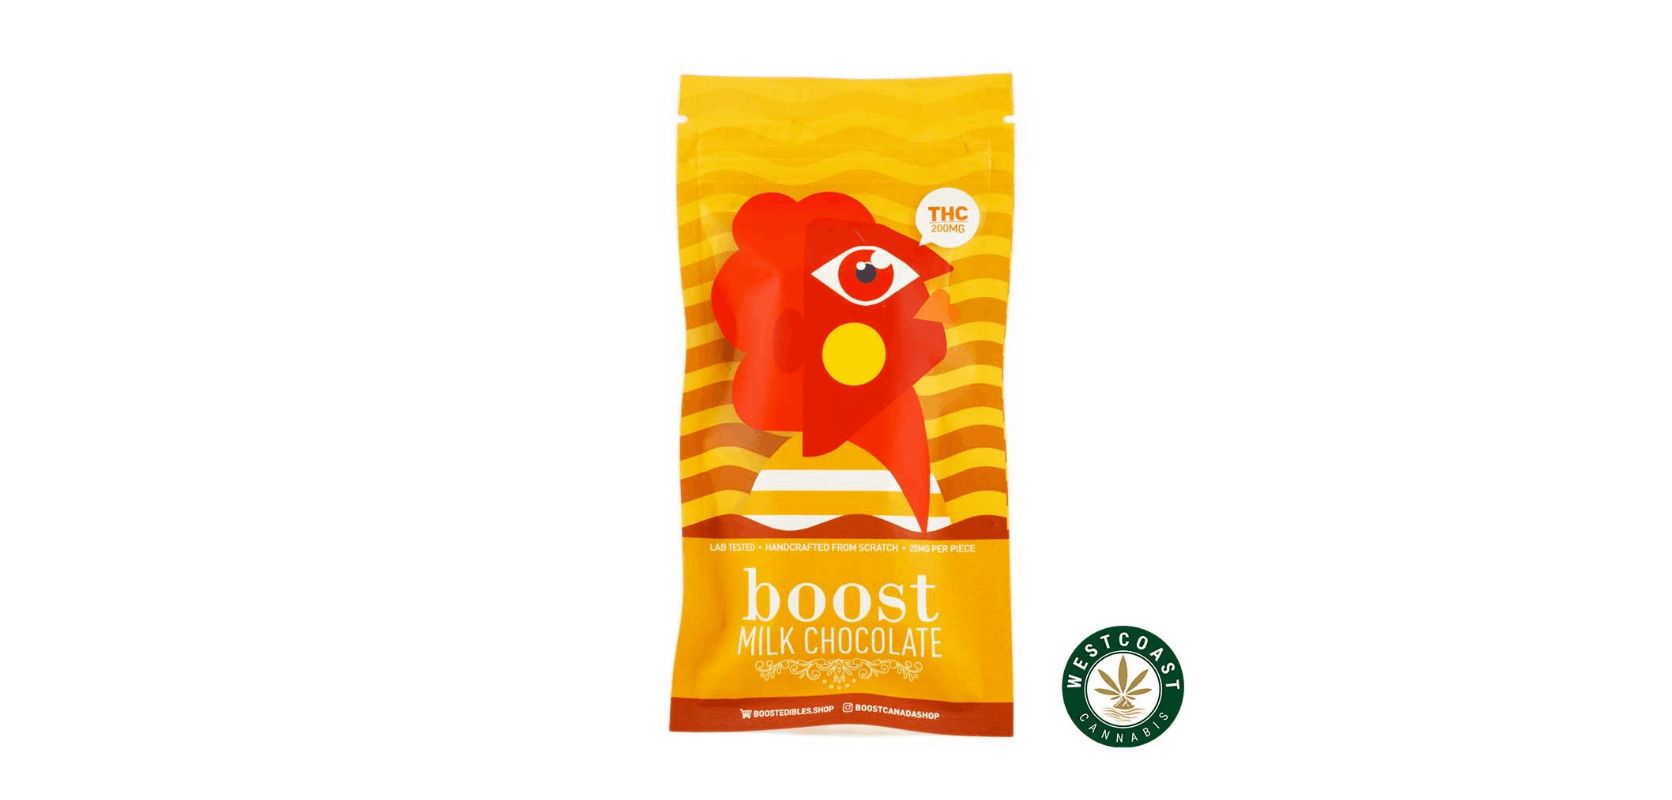 The experience with Boost Edibles - Milk Chocolate Bar 200mg THC can be summarised as rich, creamy and uplifting. 